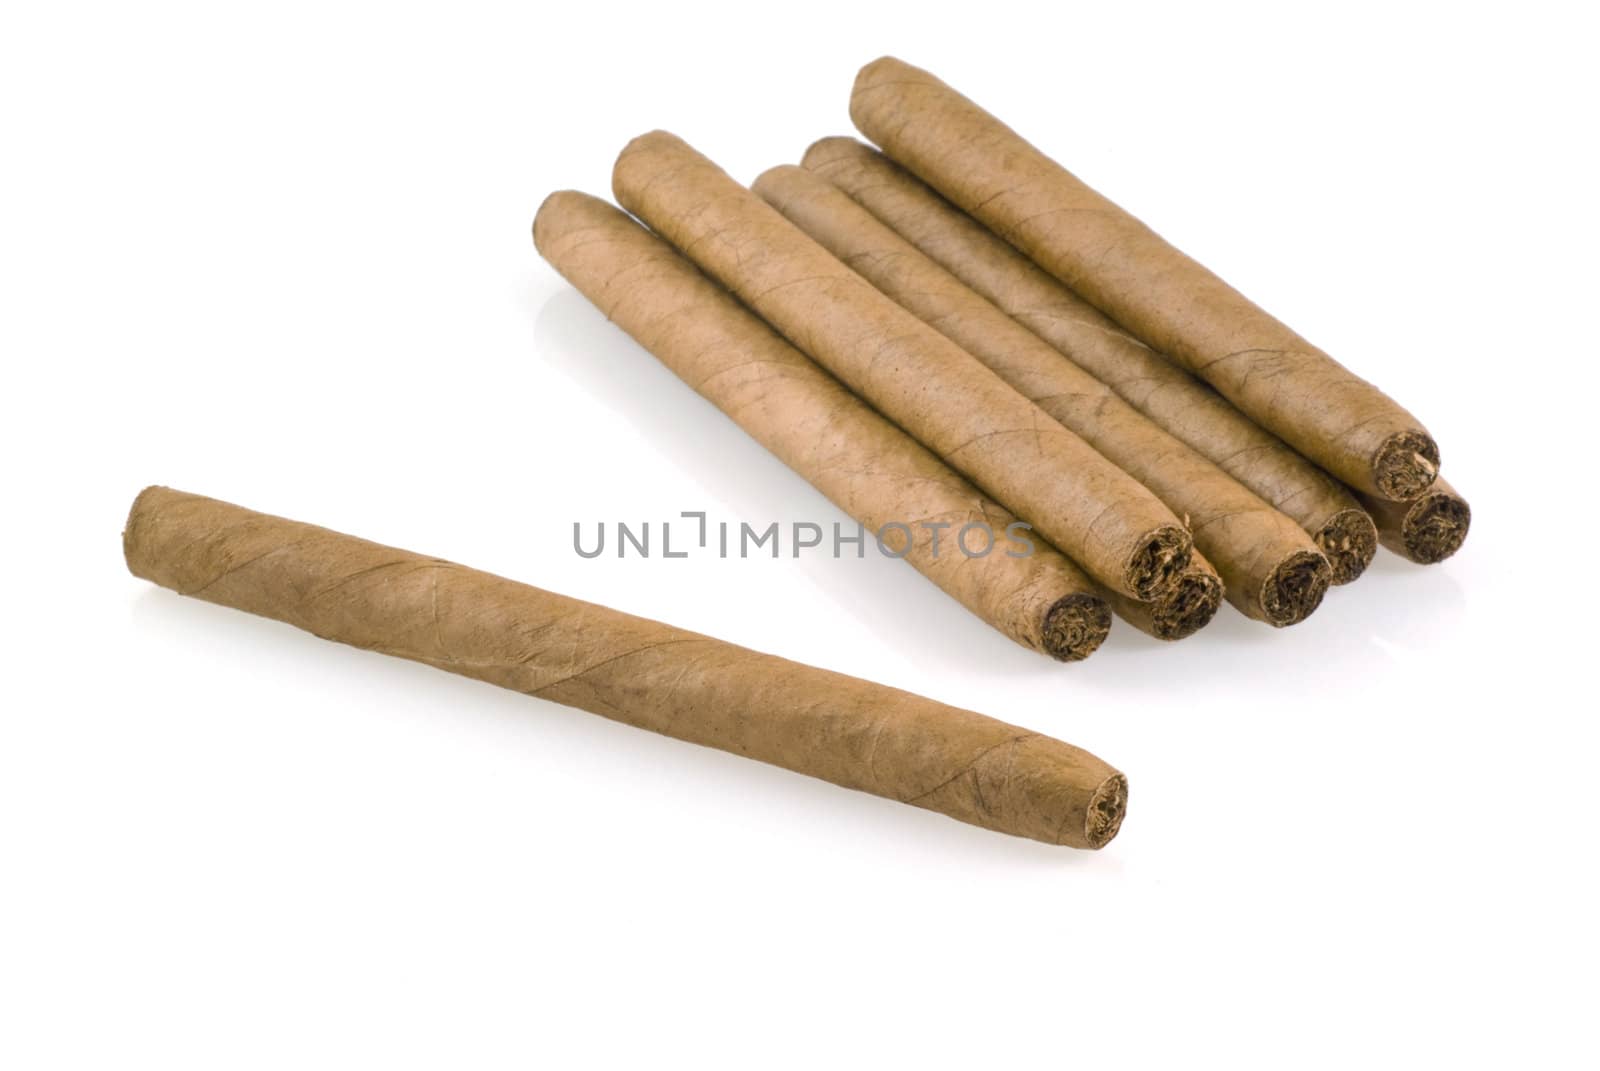 Bunch of cigars on a white background.